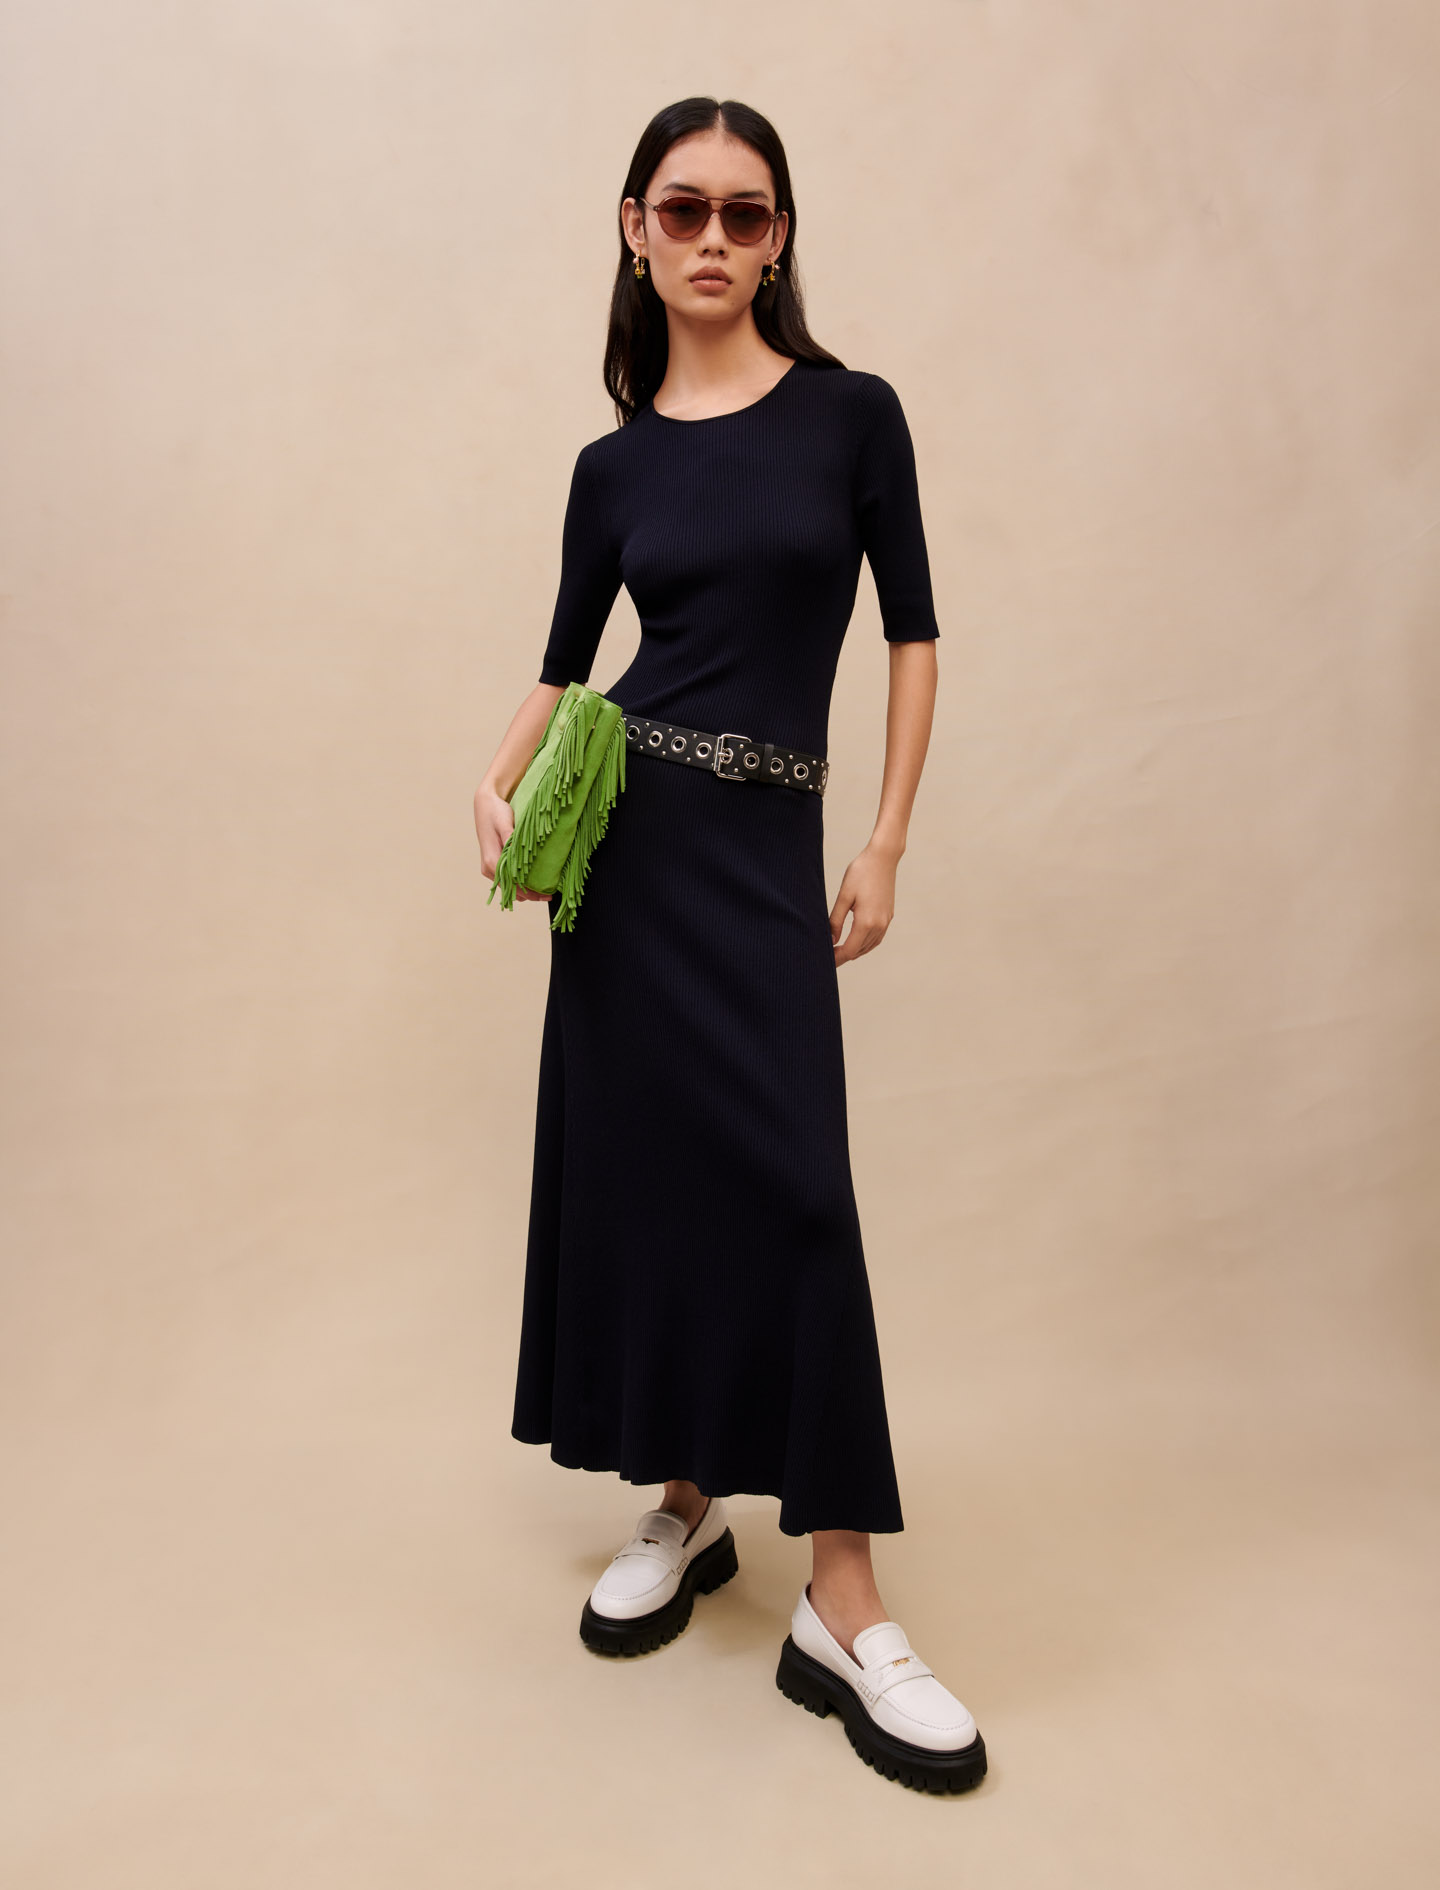 Maje Woman's viscose, Long cut-out knit dress for Fall/Winter, in color Navy / Blue